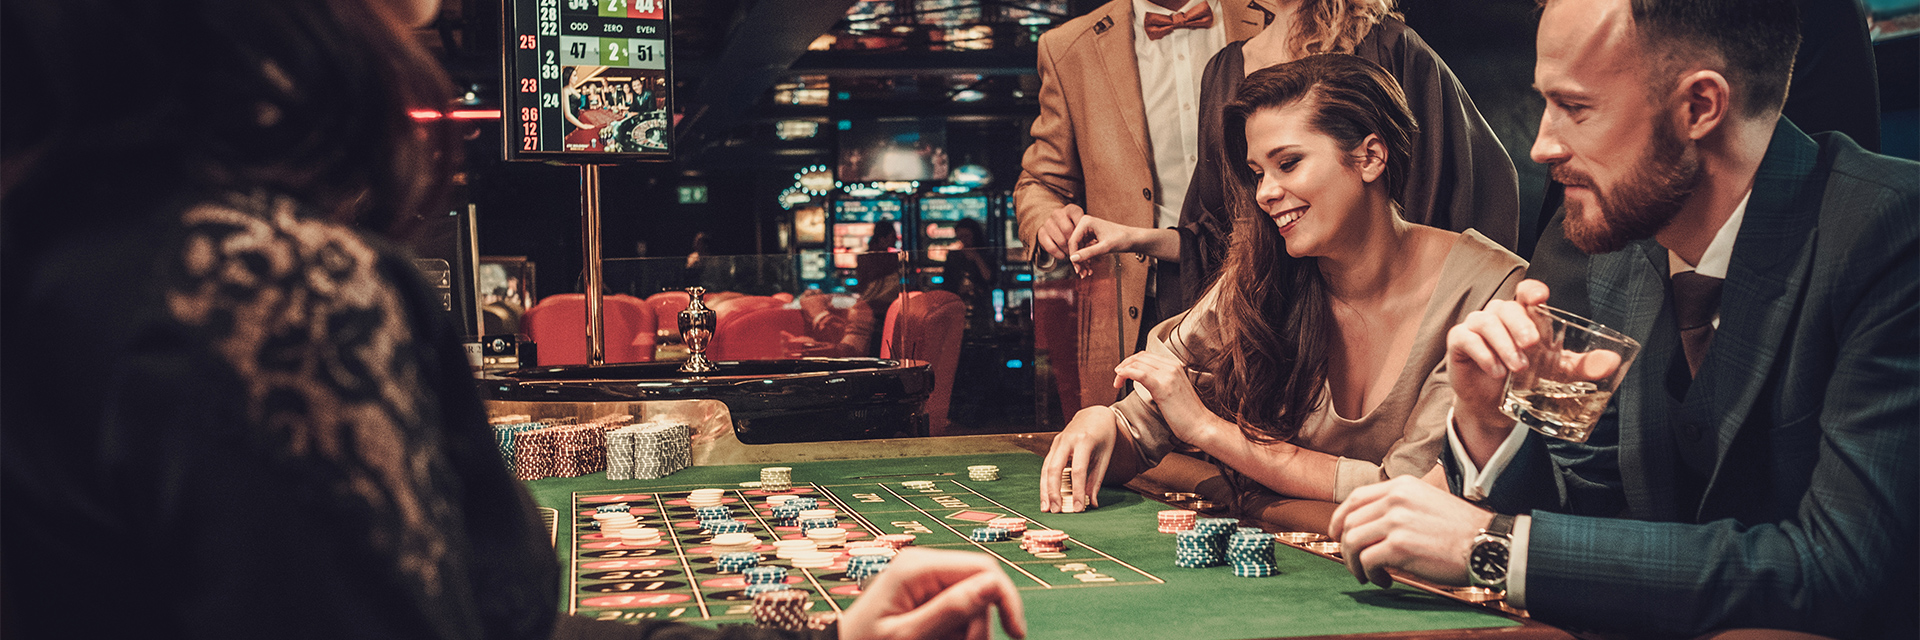 Image of people sitting around a casino table